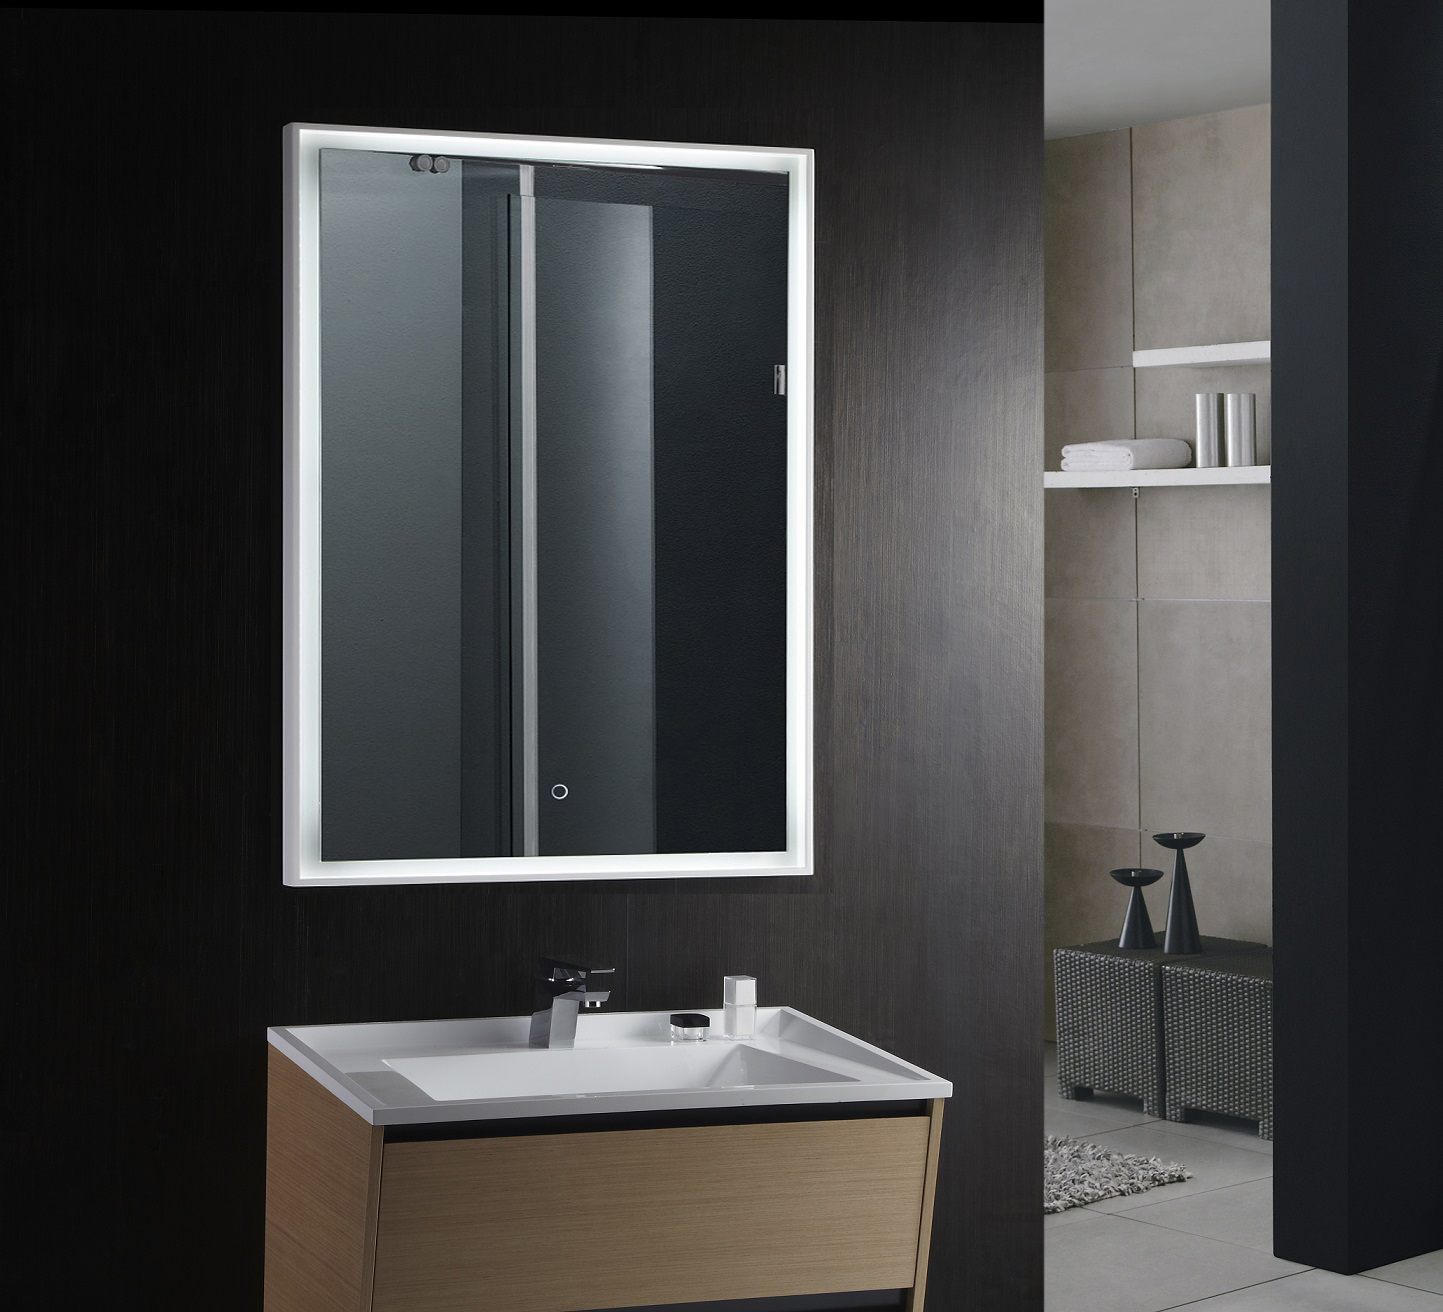 Featured image of post Illuminated Bathroom Cabinets The perfect bathroom invention mirror bathroom wall cabinets provide a mirror and storage space for toiletries medicines and cosmetics whilst taking up minimal wall and floor space